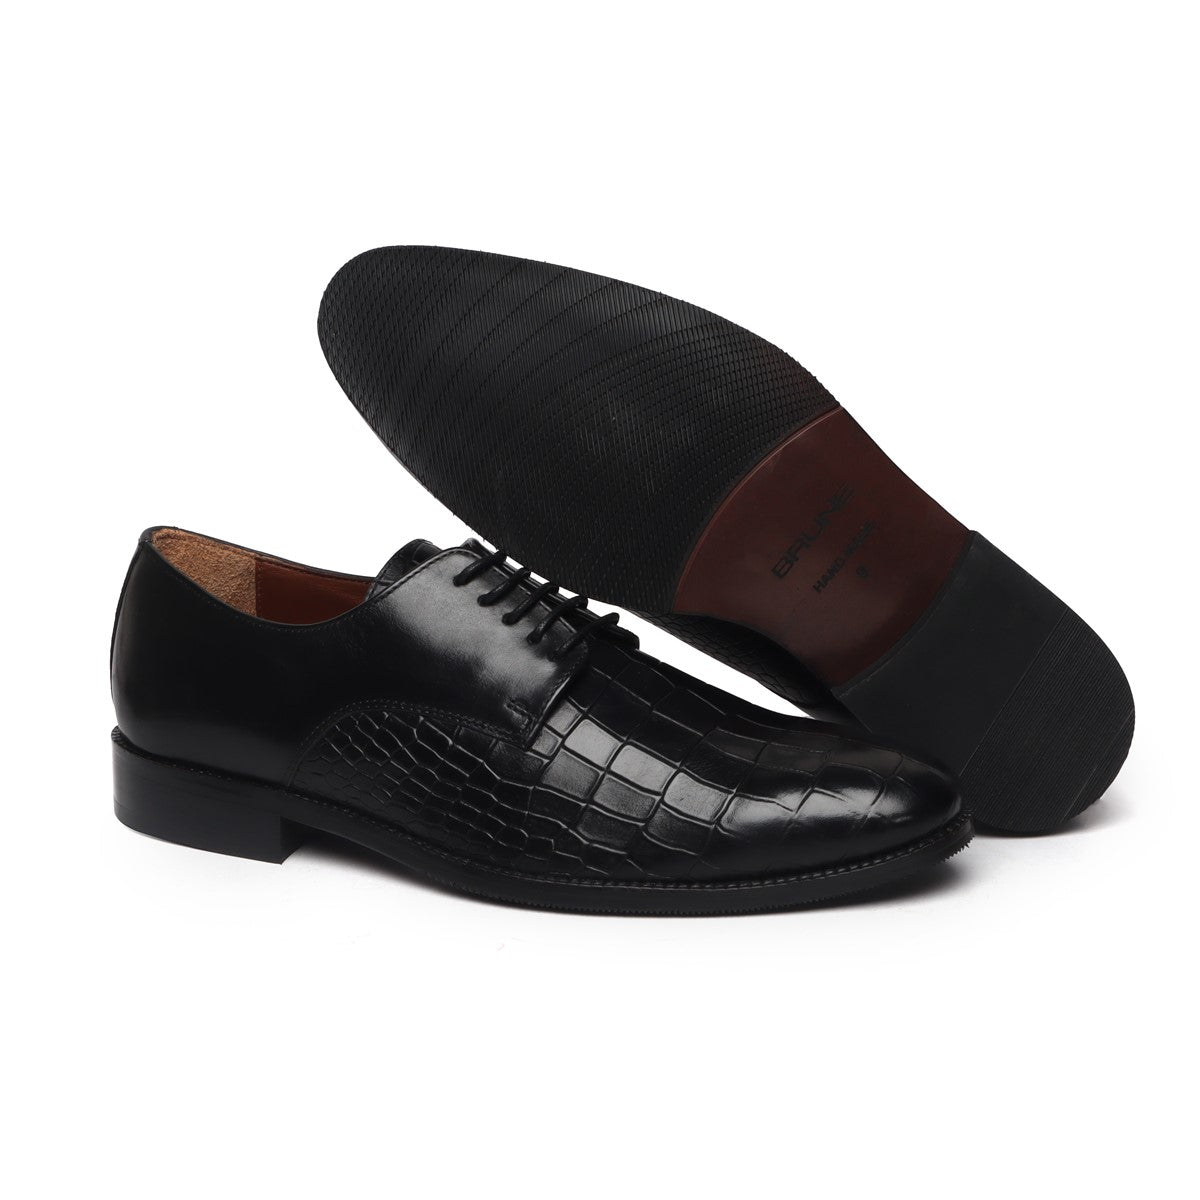 Black Deep Cut Leather Lace-Up Shoes by Brune & Bareskin